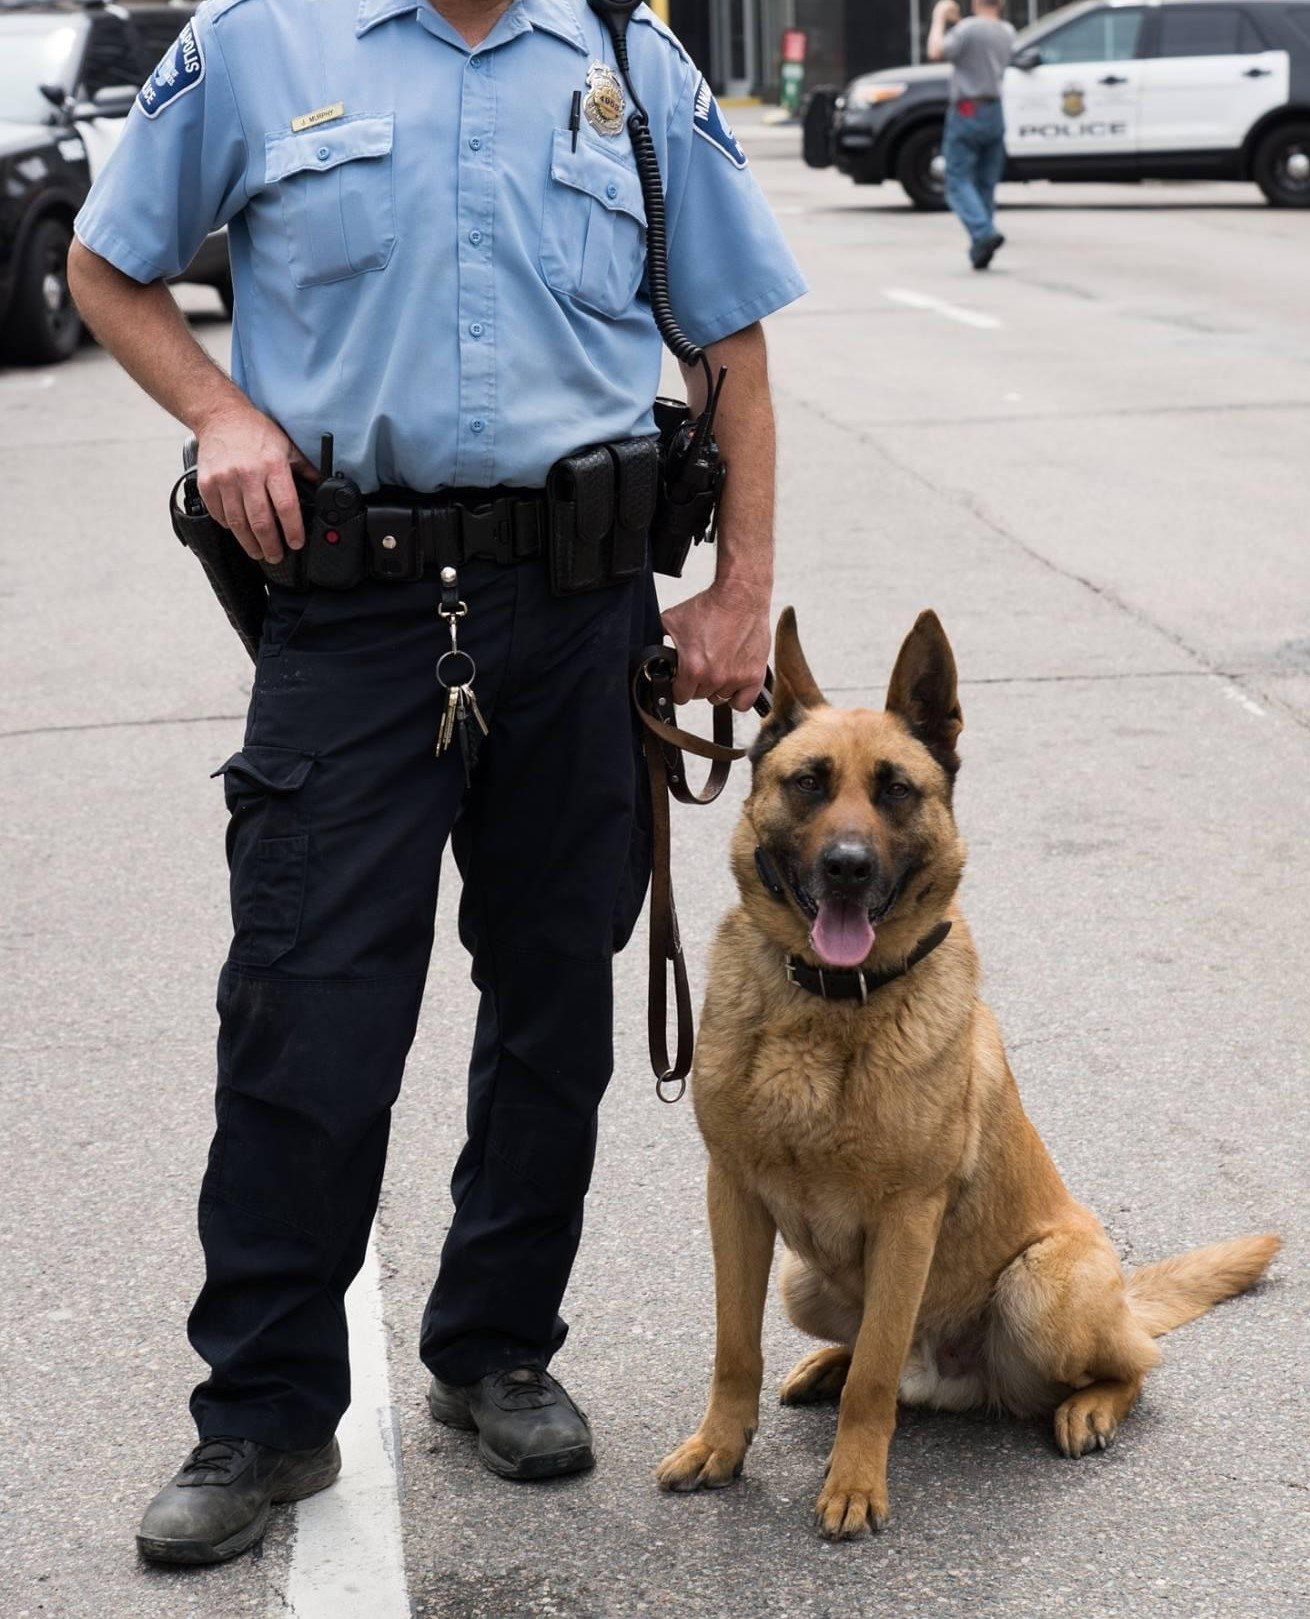 Canine and officer.